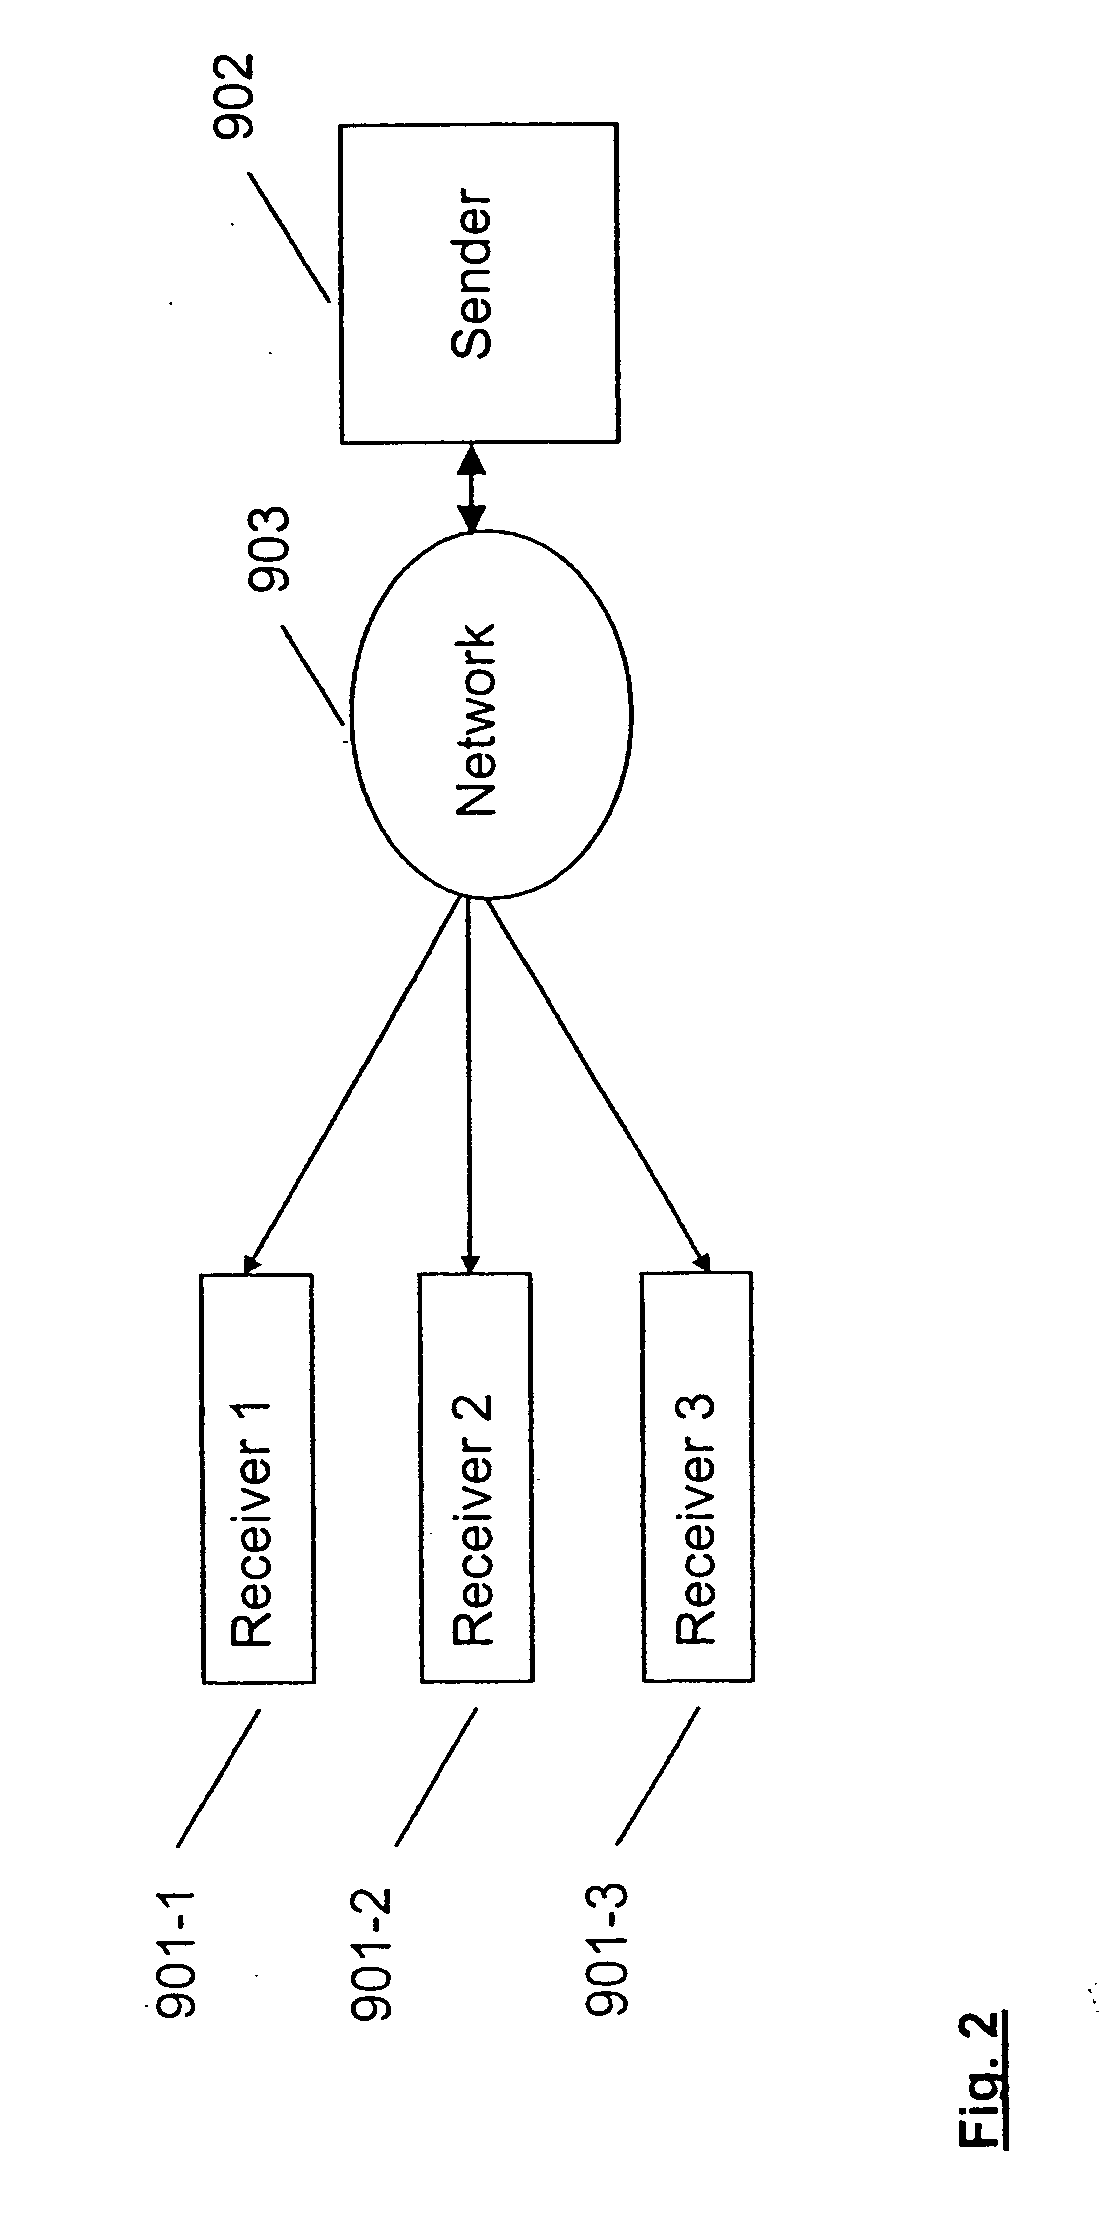 Conveying parameters for broadcast/multicast sessions via a communication protocol